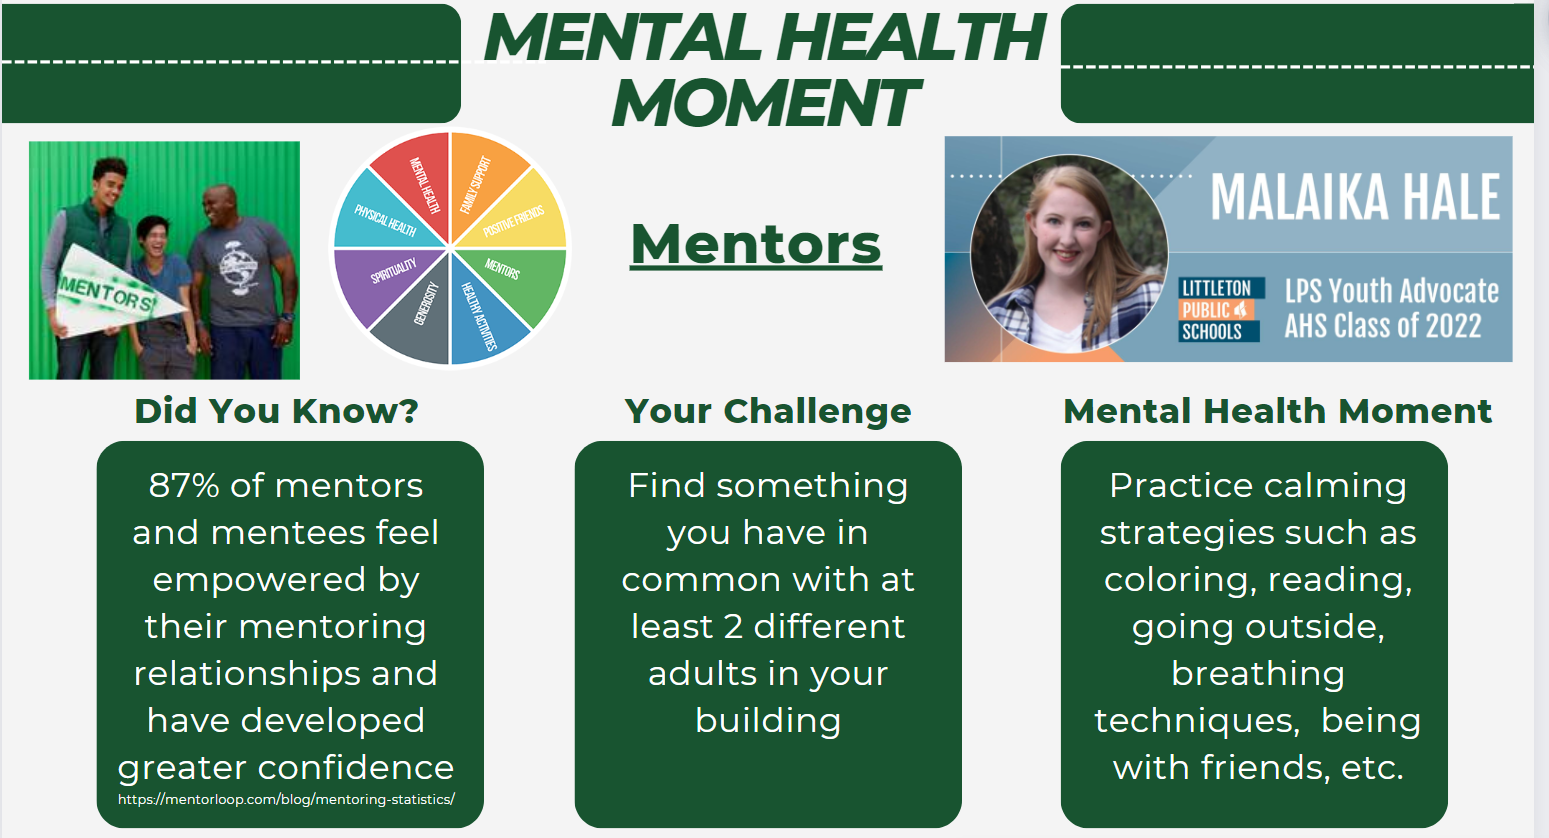 Mental Health Moments: Mentors - Malaika Hale LPS Youth Advocate AHS Class of 2022 (full text under the image)